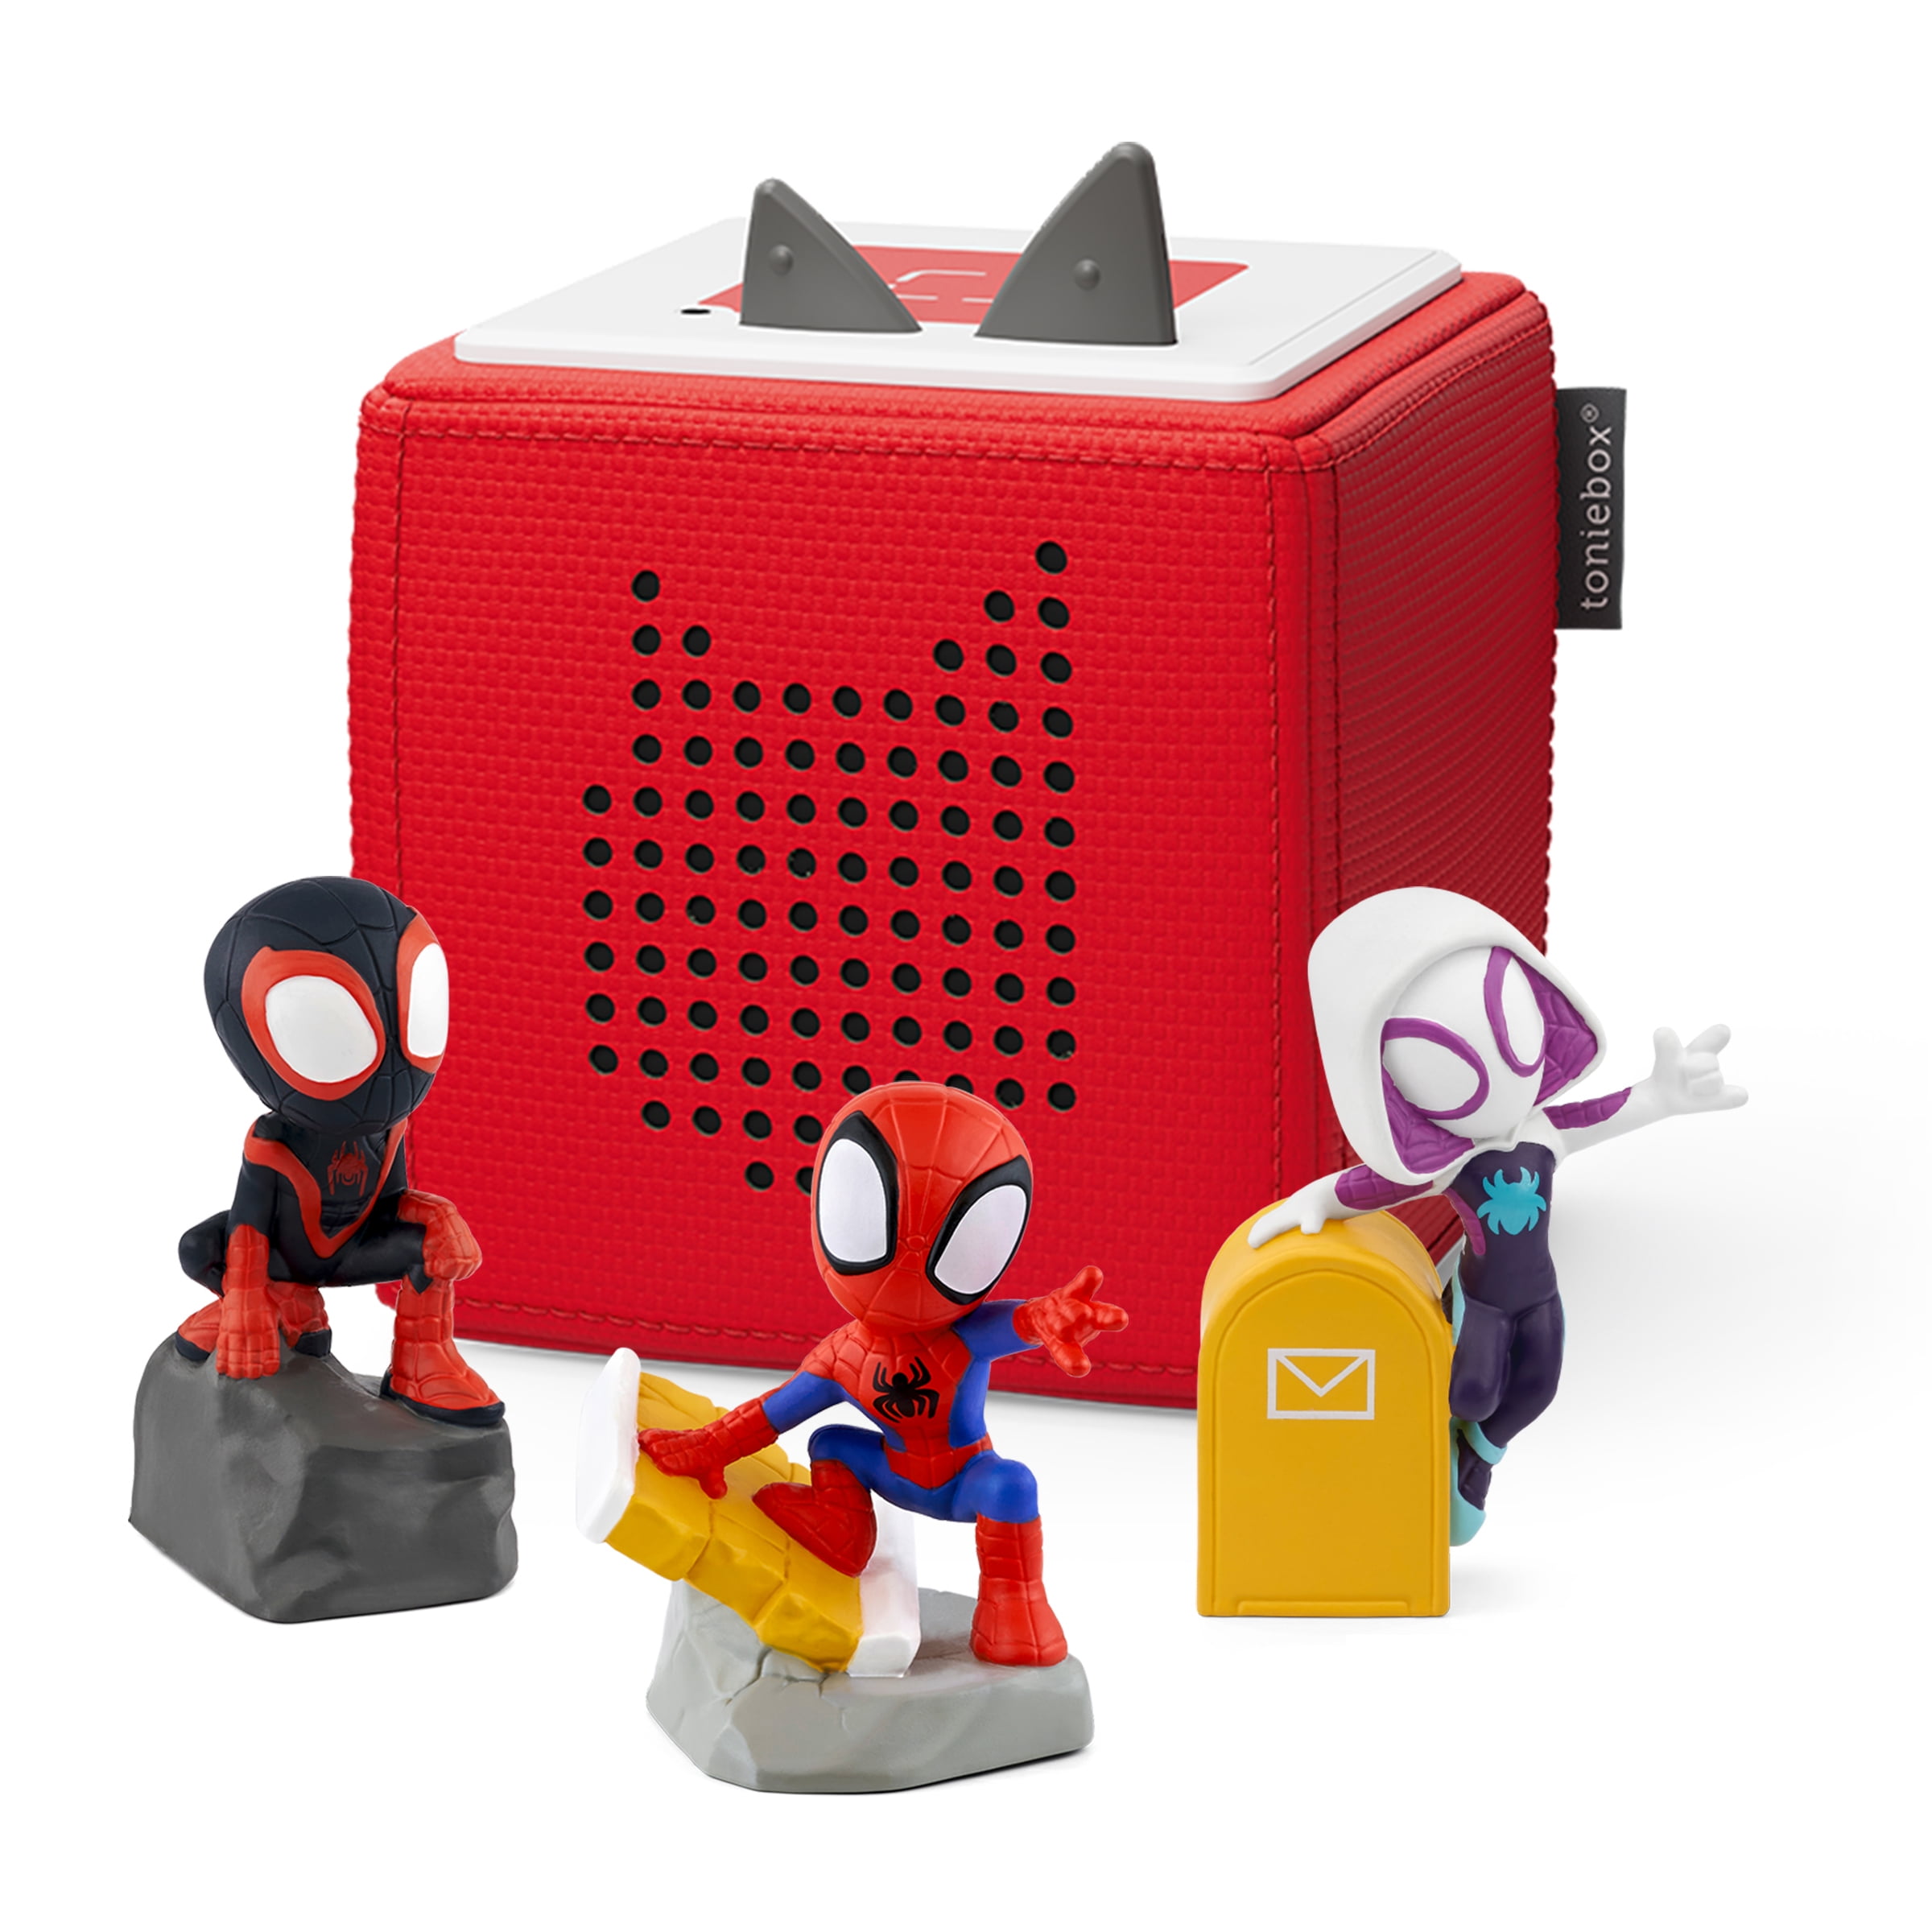 Tonies Marvel Toniebox Audio Player Bundle with Spidey and Friends, Red $79 at Walmart